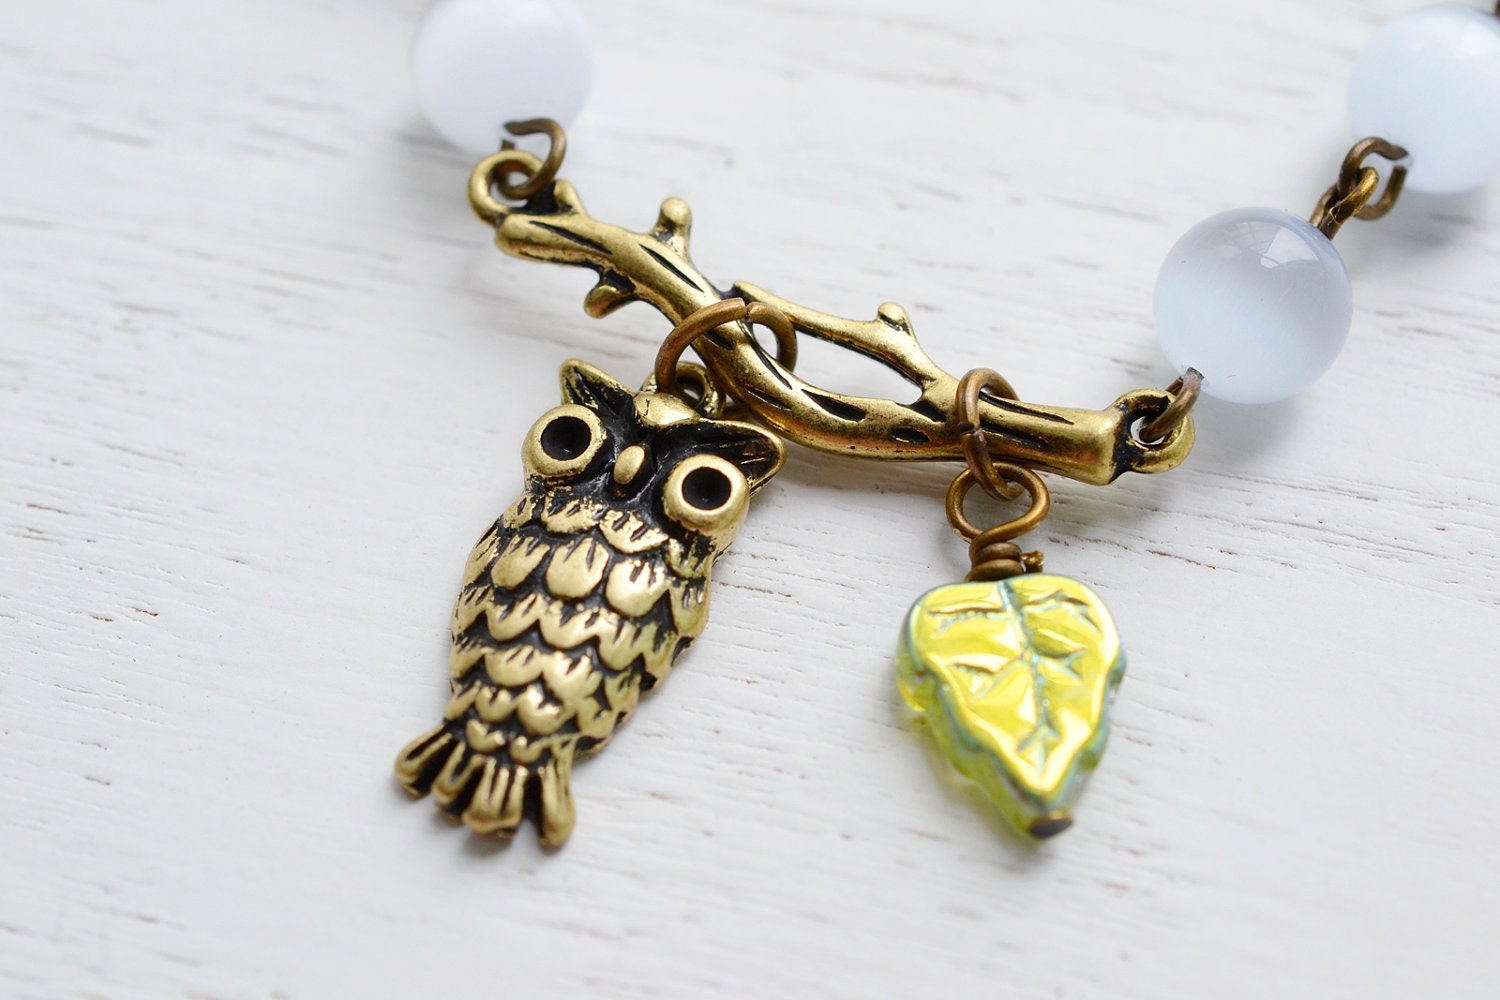 Owl Necklace,Owl Pendant Necklace,Beaded Owl Jewelry, Cats Eye, Brass Owl Charm Necklace, Whimsical, Quirky, Everyday Jewelry, Fashion - KimFong